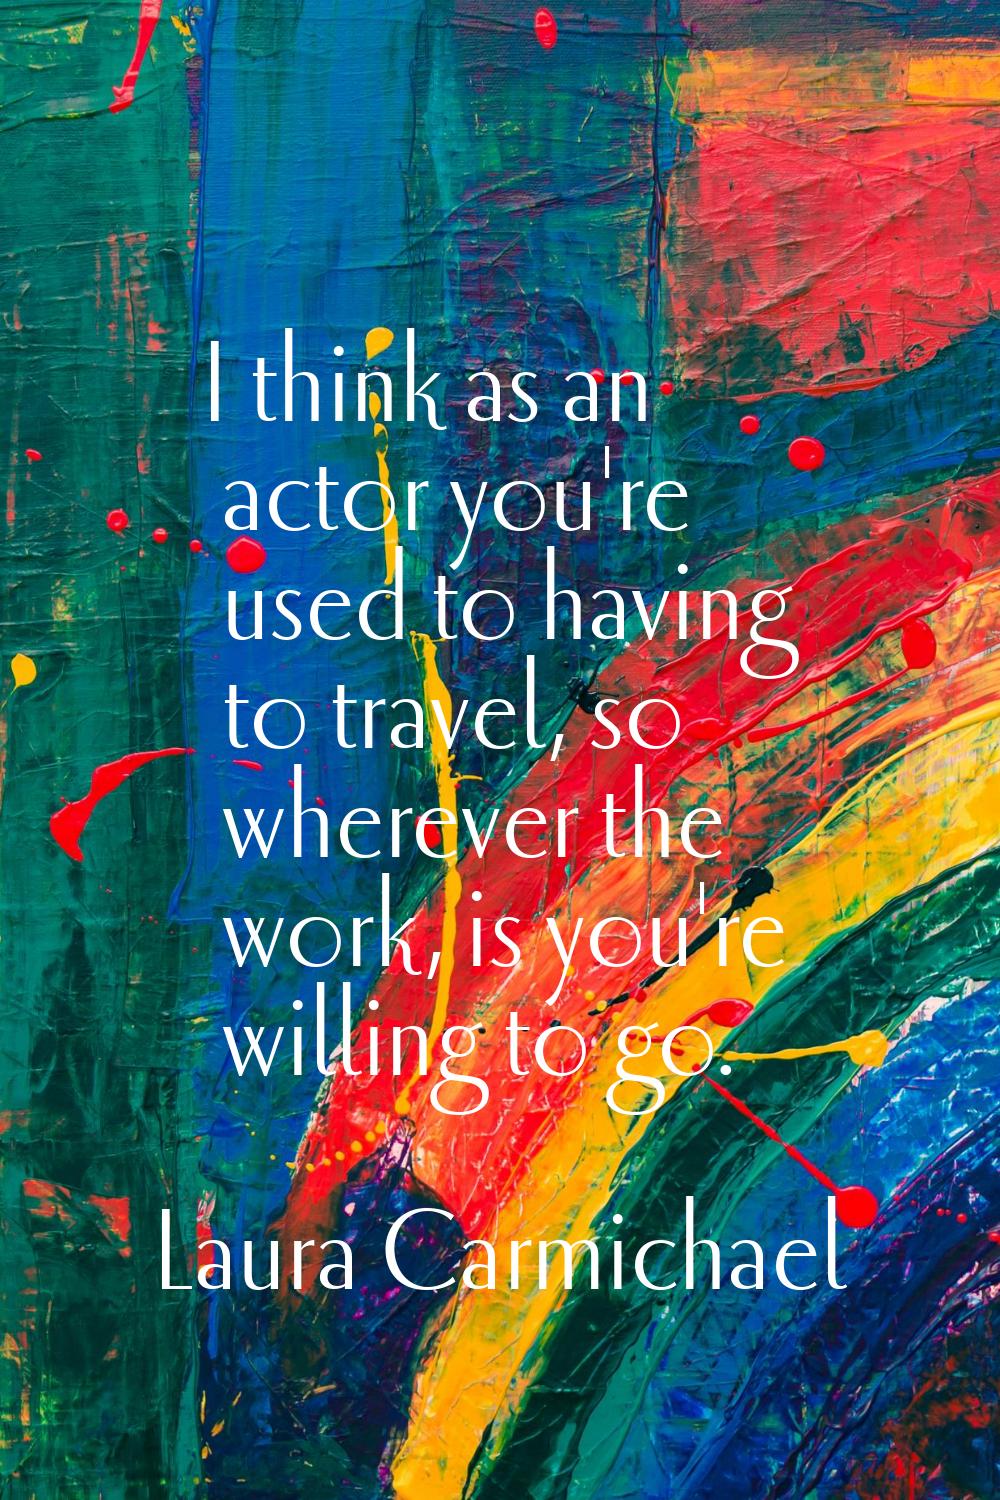 I think as an actor you're used to having to travel, so wherever the work, is you're willing to go.